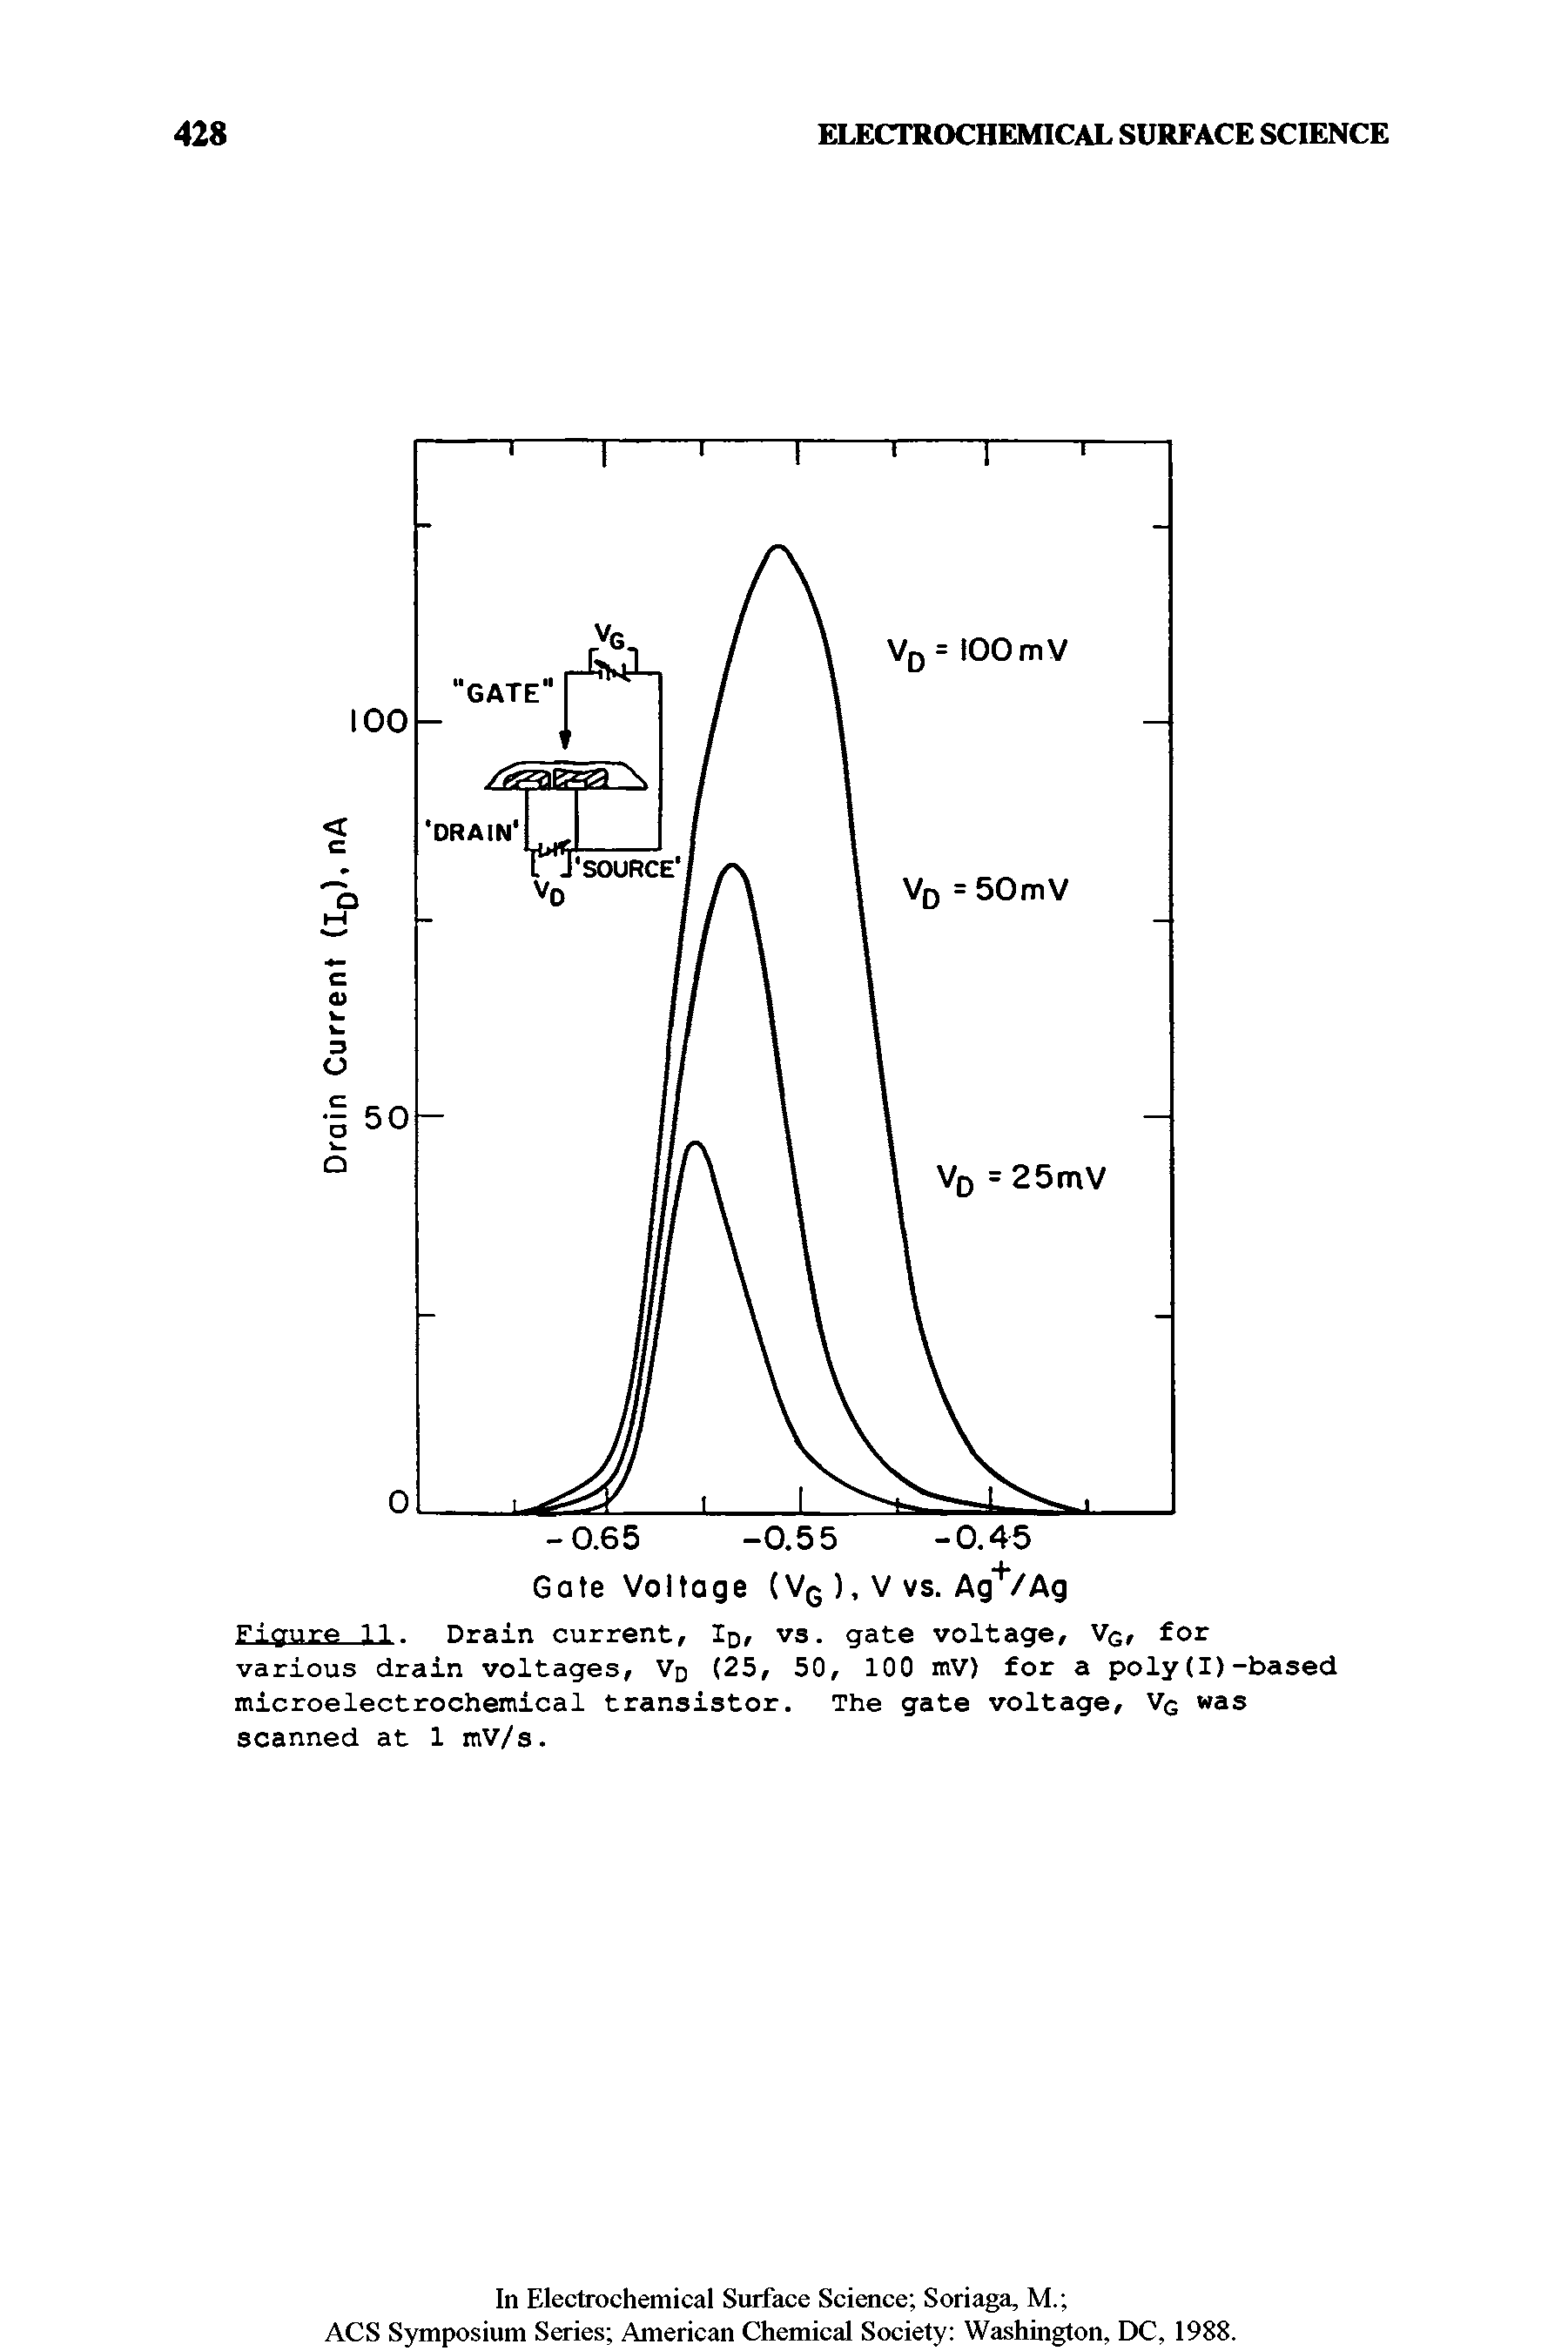 Figure 11. Drain current, Id, vs. gate voltage, Vg, for various drain voltages, Vq (25, 50, 100 mV) for a poly(I)-based microelectrochemical transistor. The gate voltage, Vq was scanned at 1 mV/s.